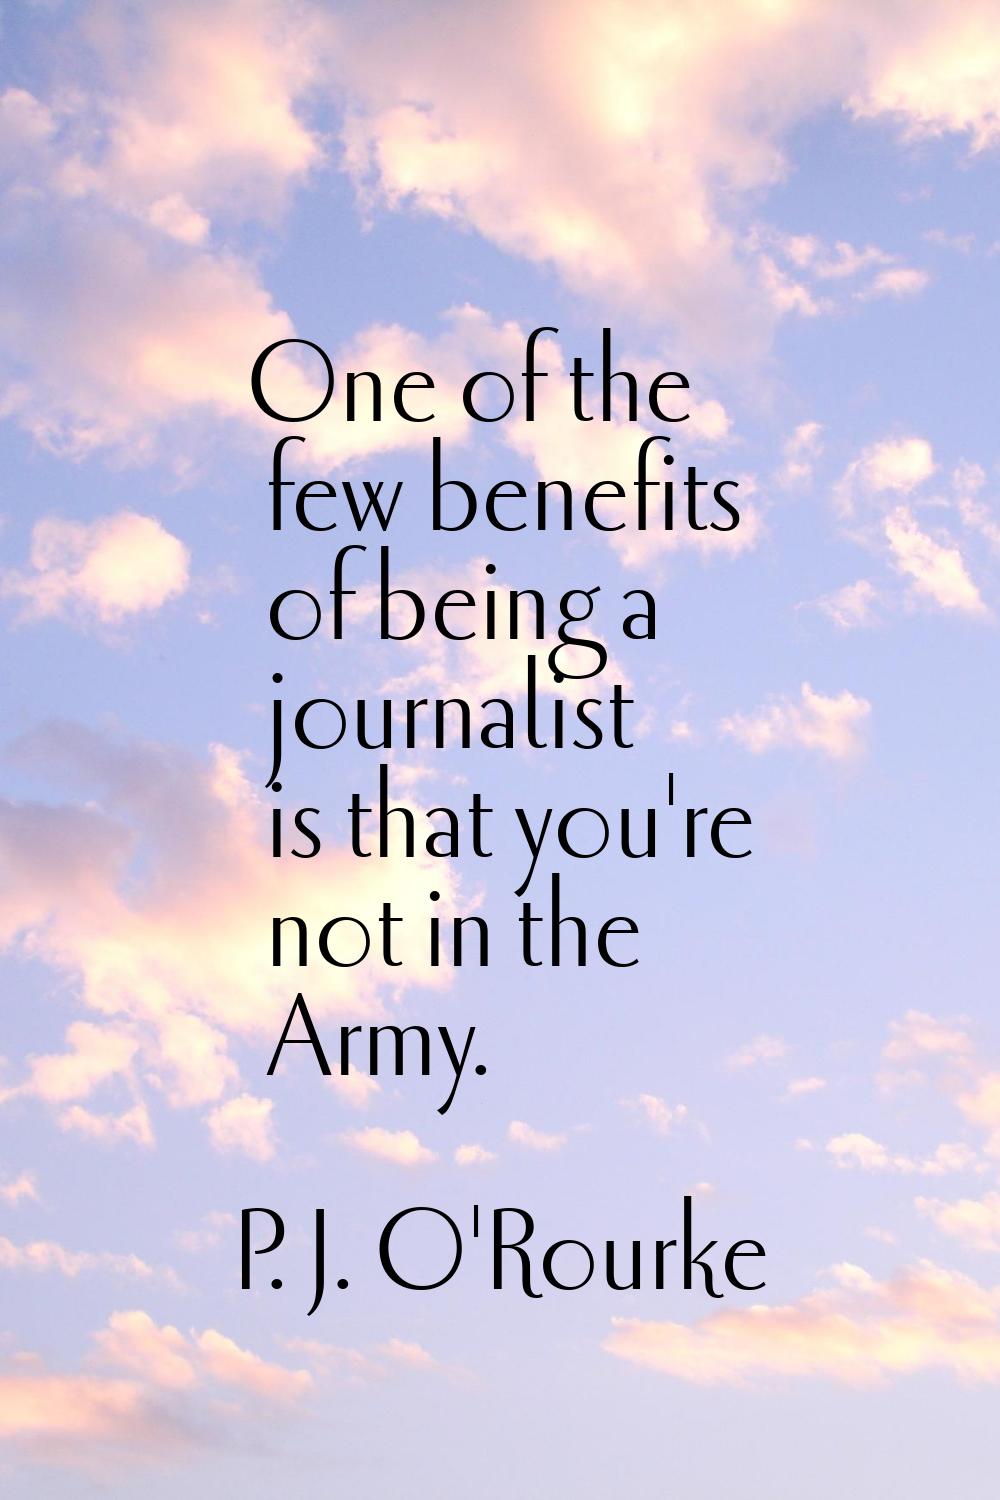 One of the few benefits of being a journalist is that you're not in the Army.